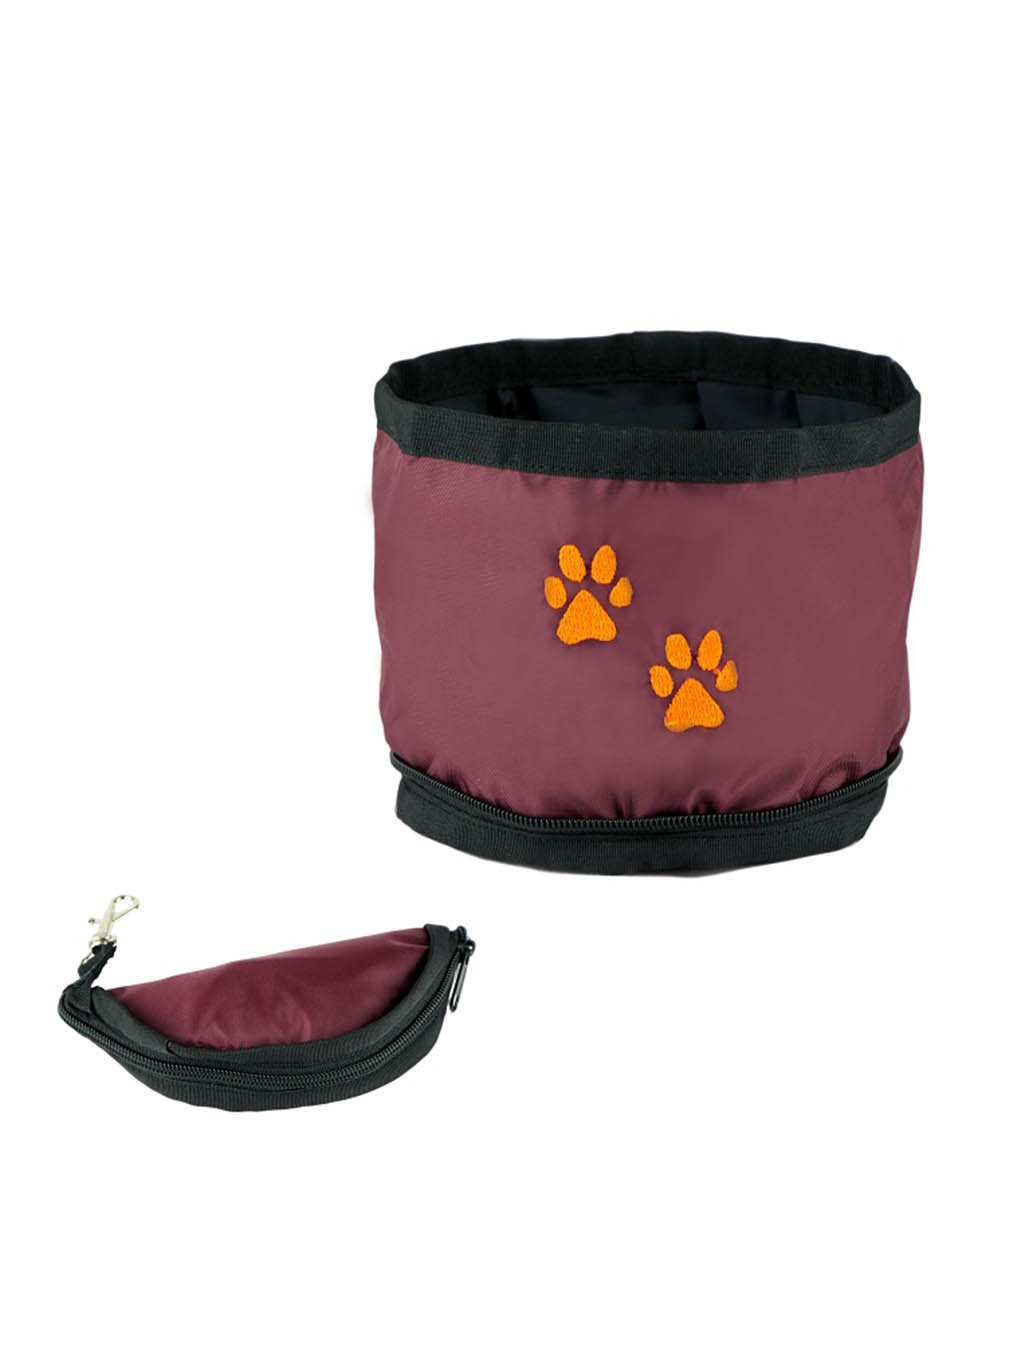 Travel bowl for smaller dogs